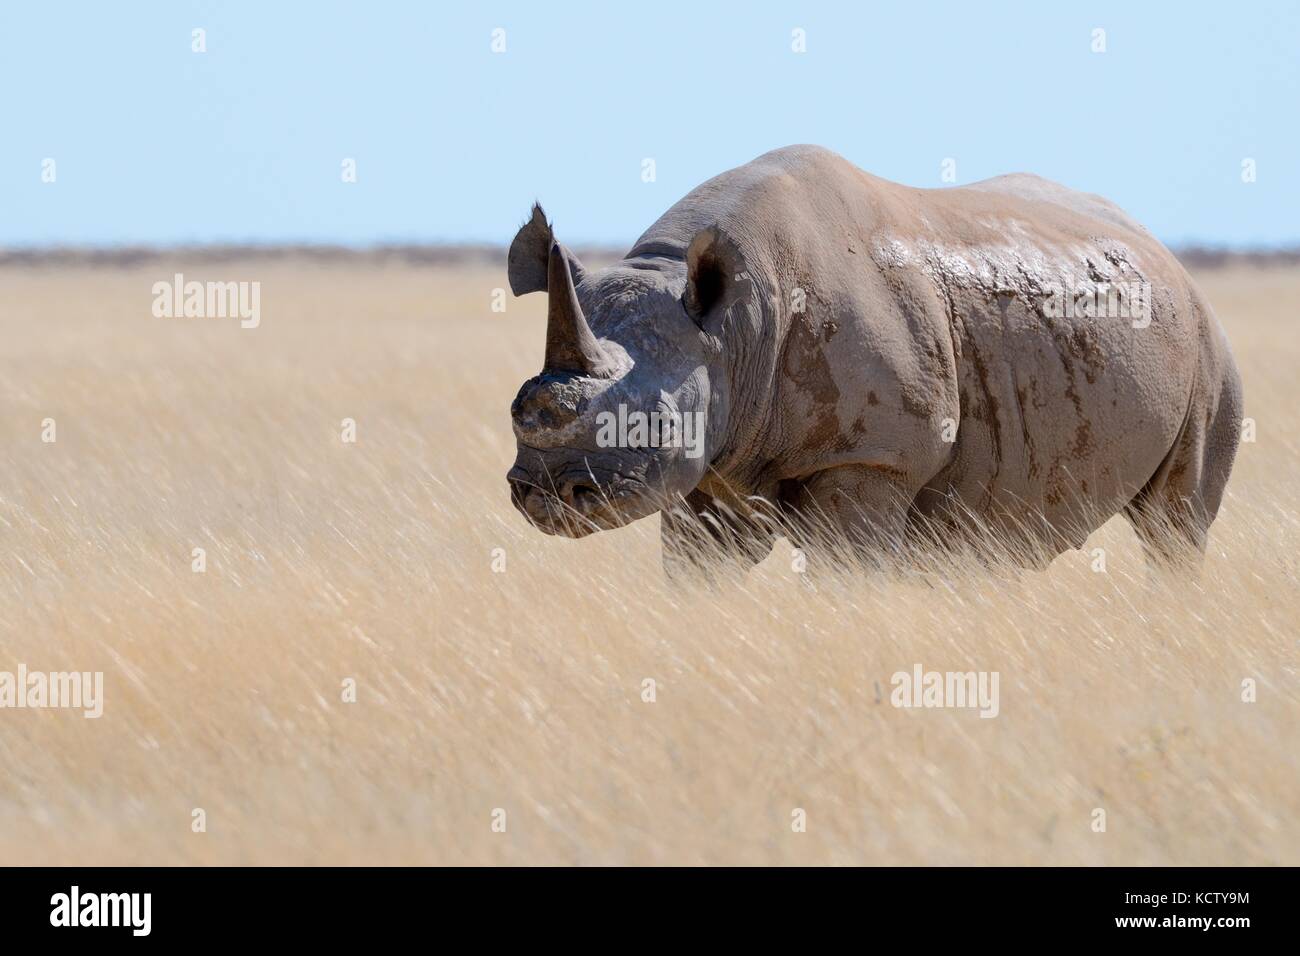 Black rhinoceros (Diceros bicornis) with a single horn and torn ears, standing in dry grass, attentive, Etosha National Park, Namibia, Africa Stock Photo